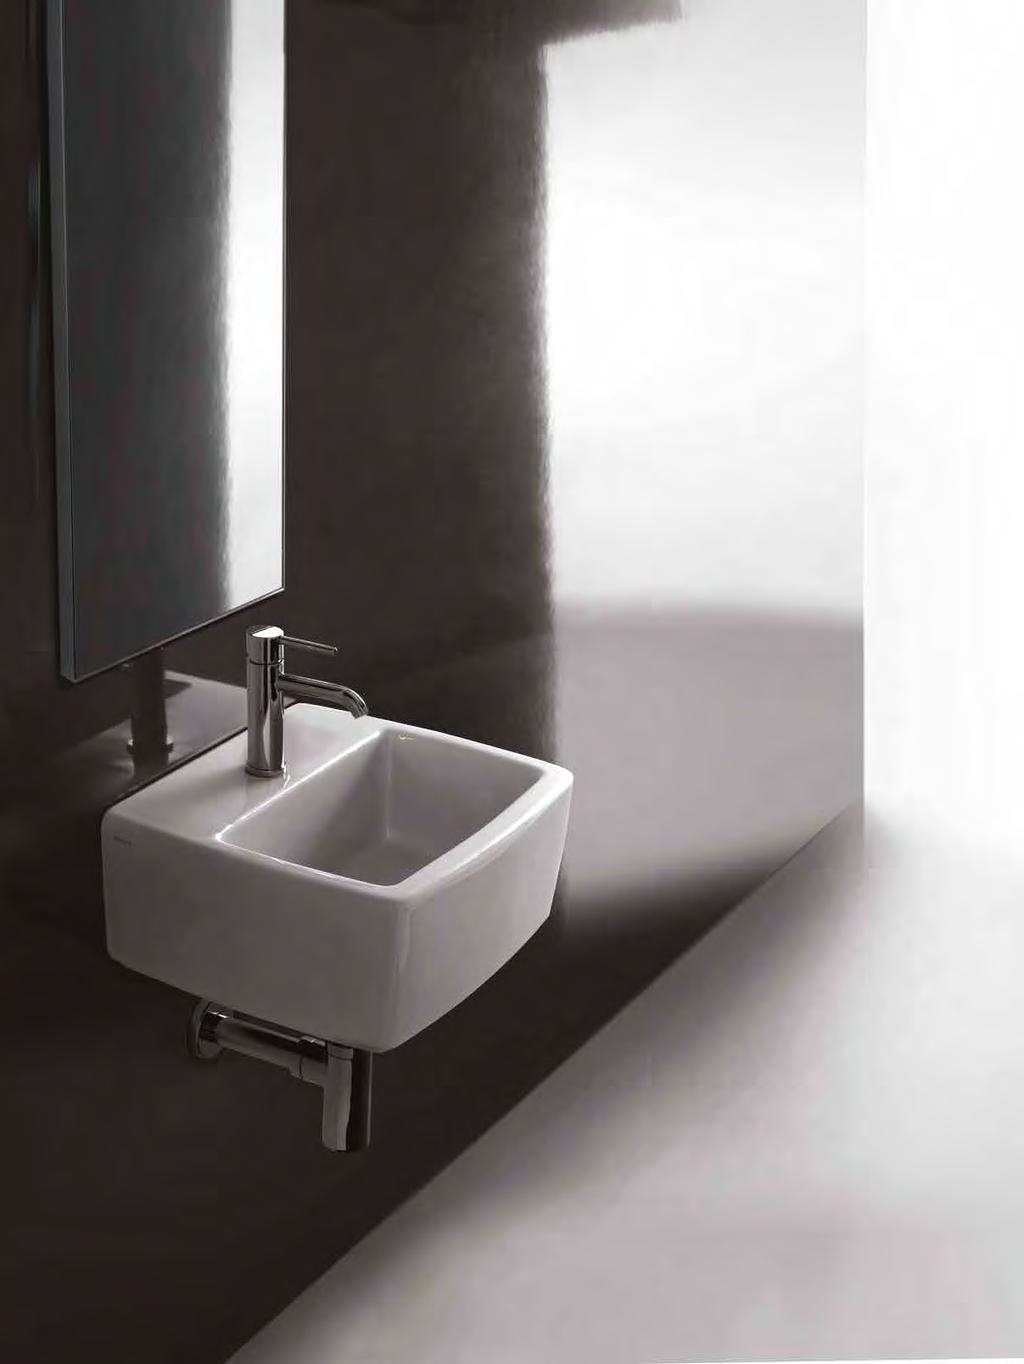 SA02 15 3/4 x 13 25/32 8951 white 26 597.00 Washbasin 15 3/4 x 13 25/32 400 x 350 mm Wall-hung or countertop washbasin. One hole. Fixing kit included.